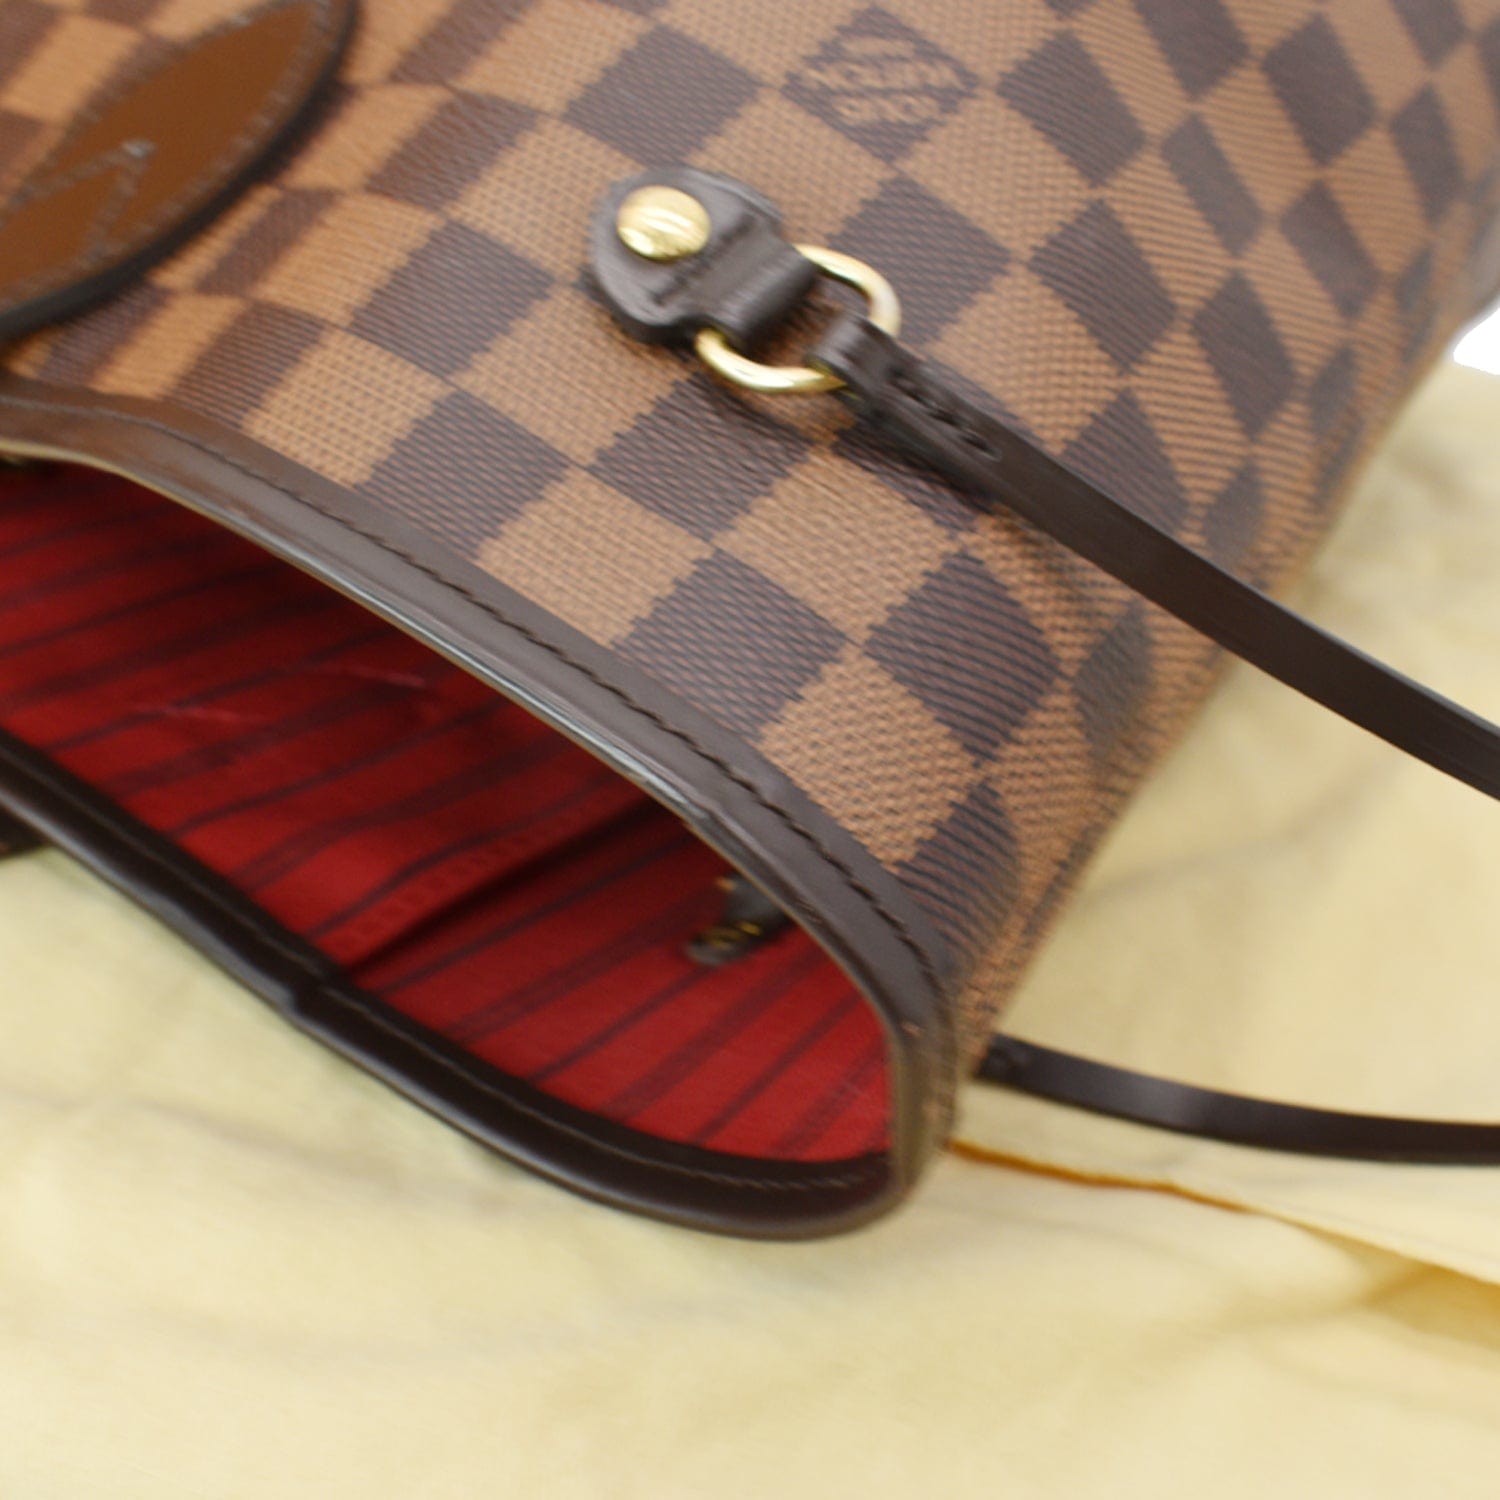 Louis Vuitton, Bags, Authentic Louis Vuitton Damier Ebene Neverfull Mm Tote  Bag Red